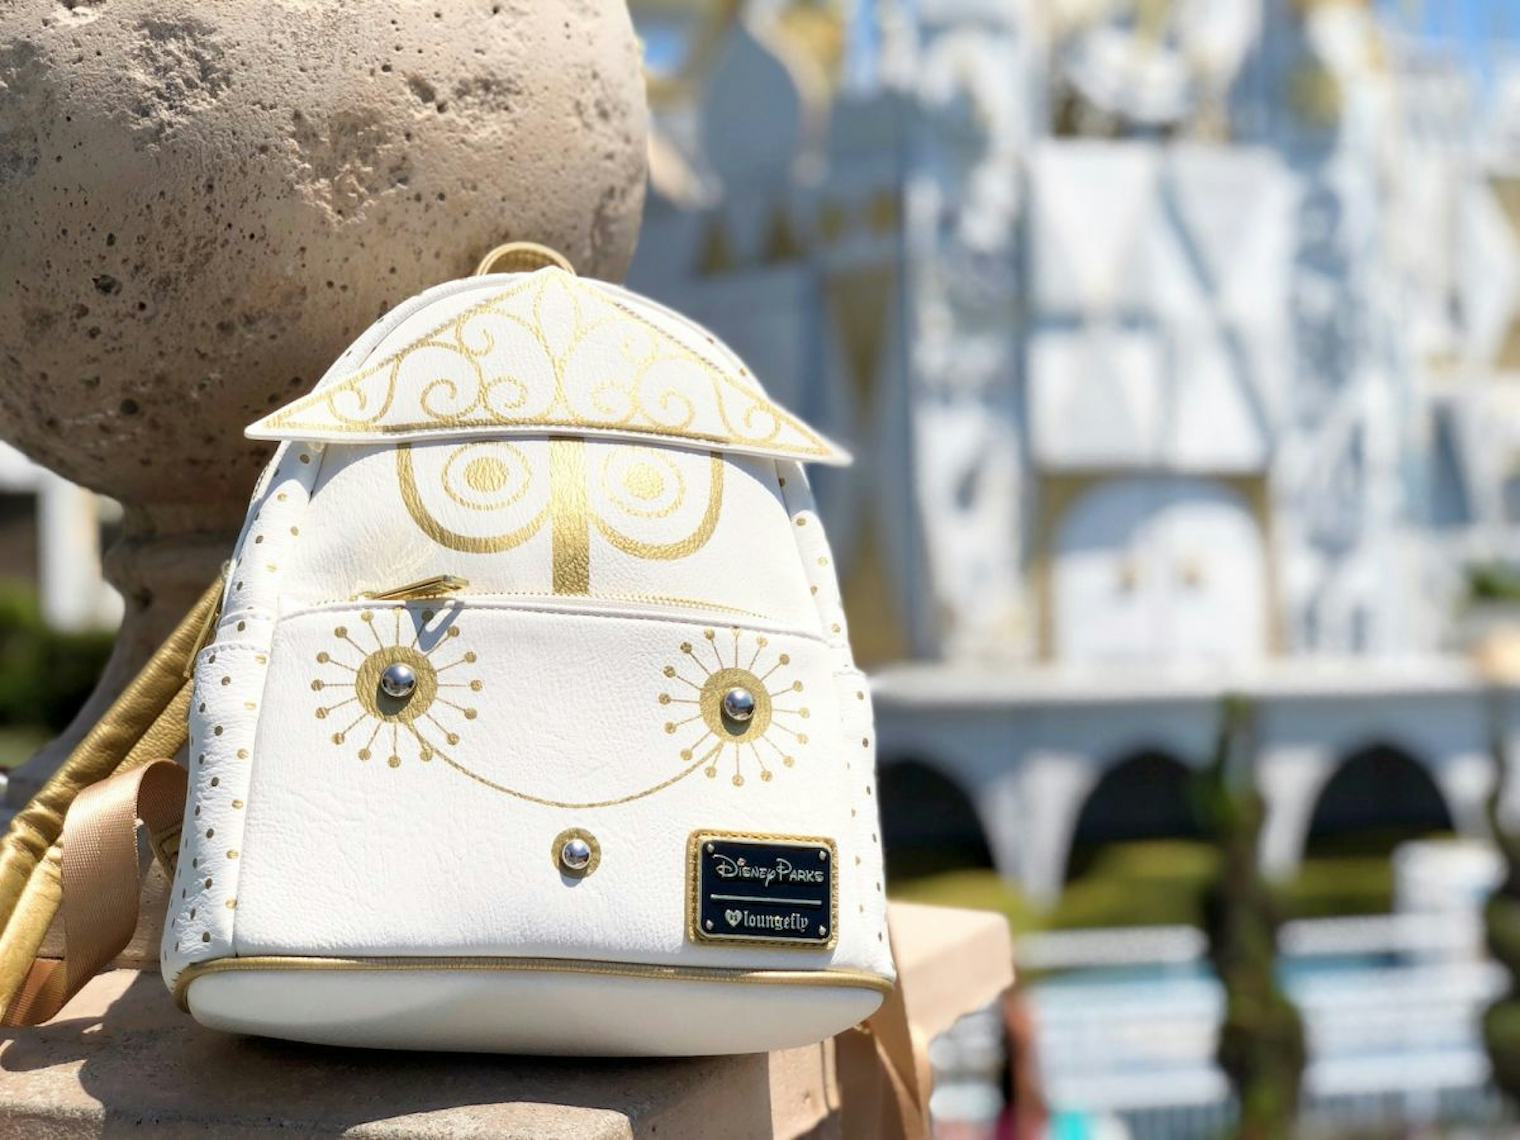 Disney Parks Mini Backpacks Honor Iconic Disney World Rides & They Are